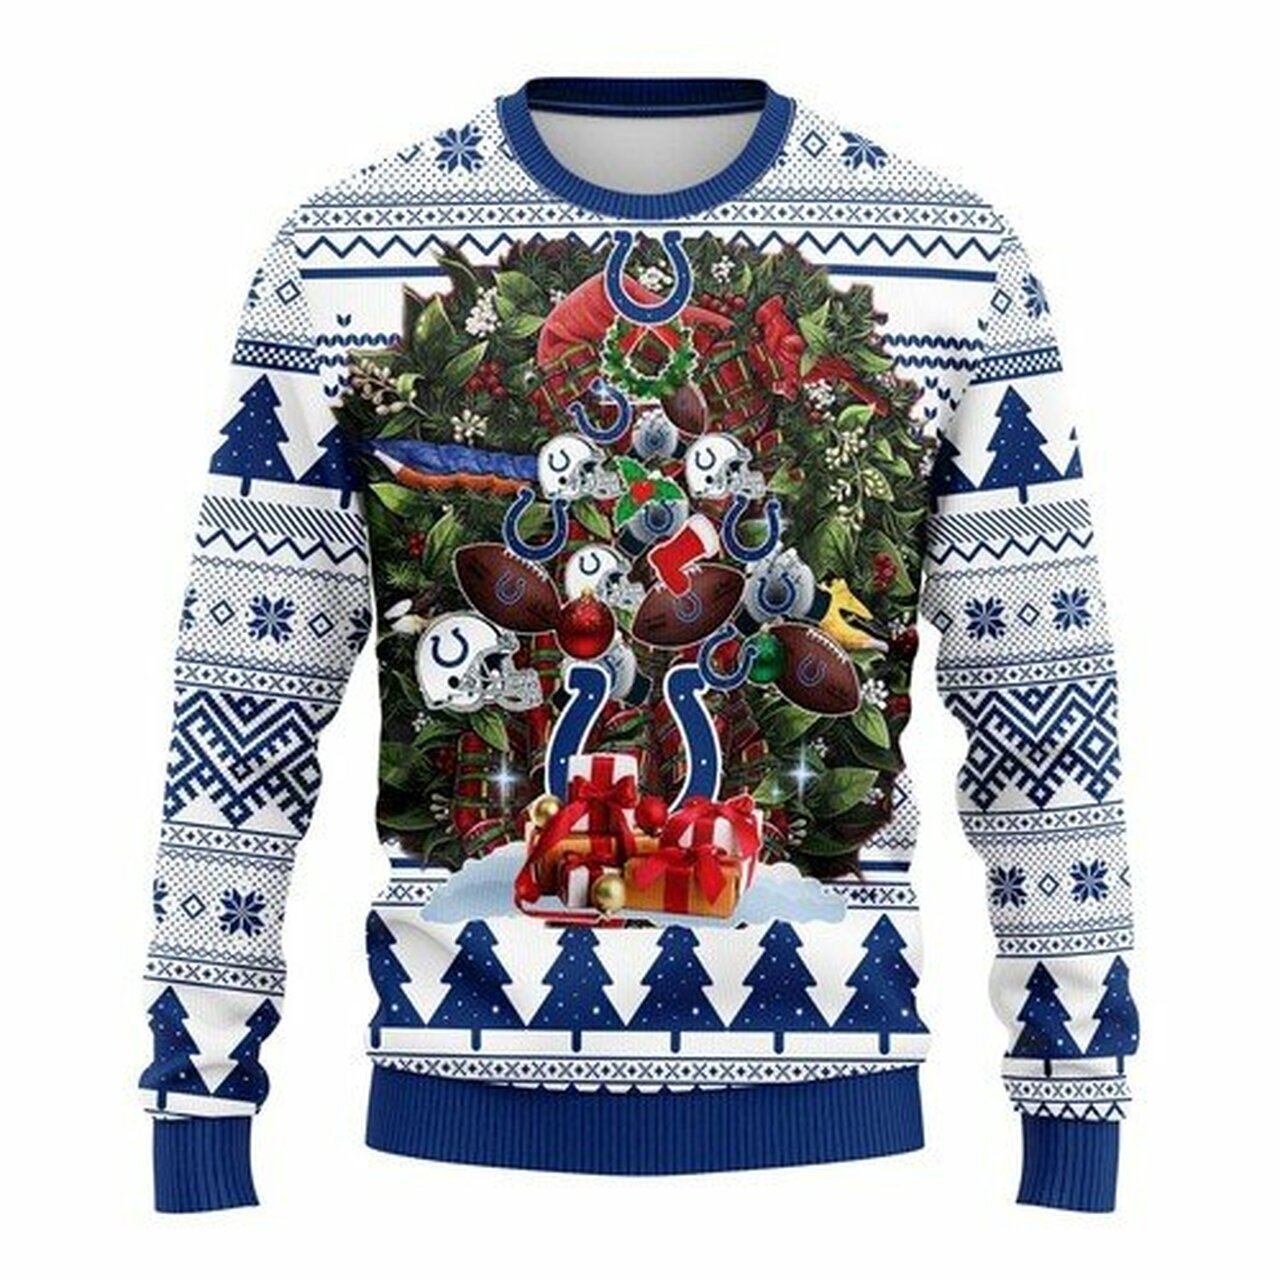 [ HOT ] NFL Indianapolis Colts christmas tree ugly sweater – Saleoff 030122